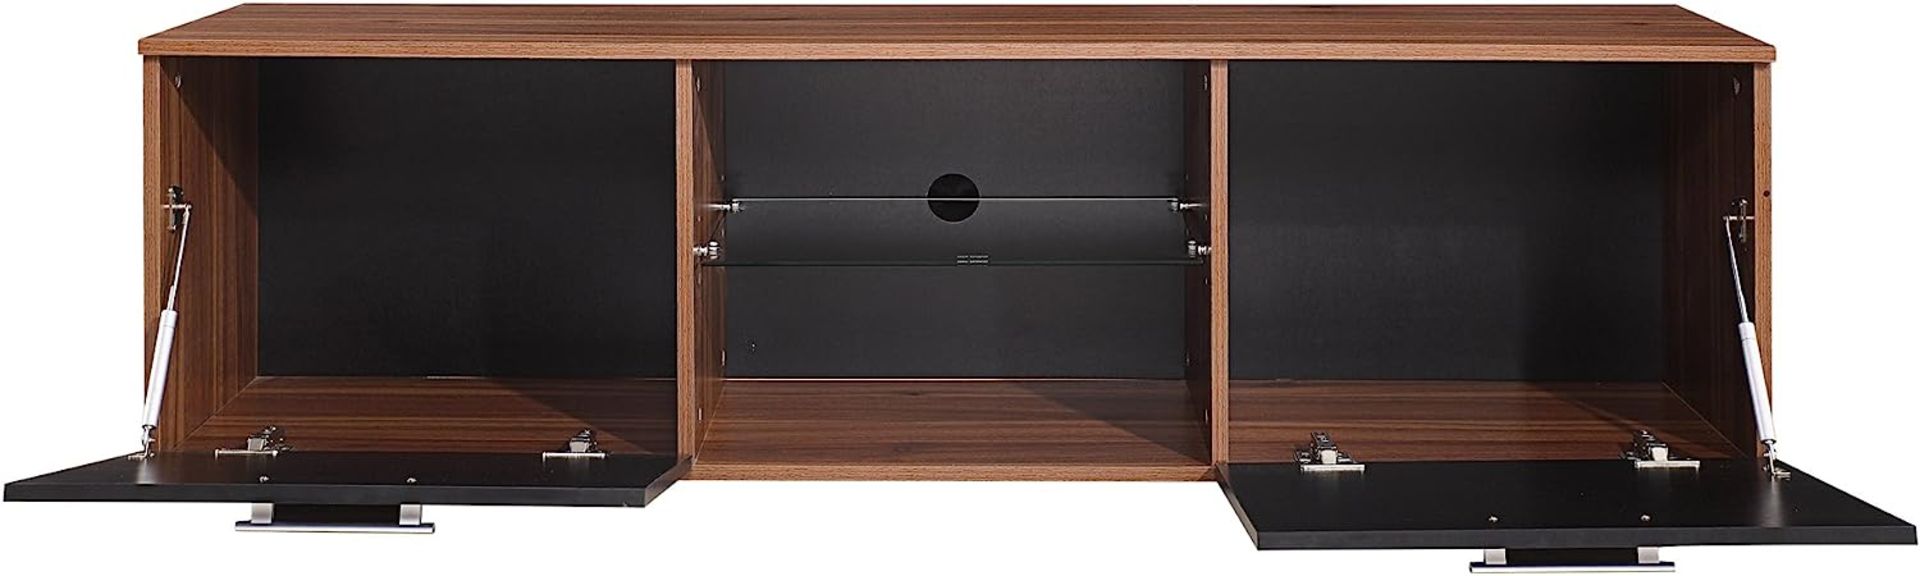 HARMIN MODERN 160CM TV STAND CABINET UNIT WITH HIGH GLOSS DOORS (BLACK ON WALNUT) - Image 5 of 9